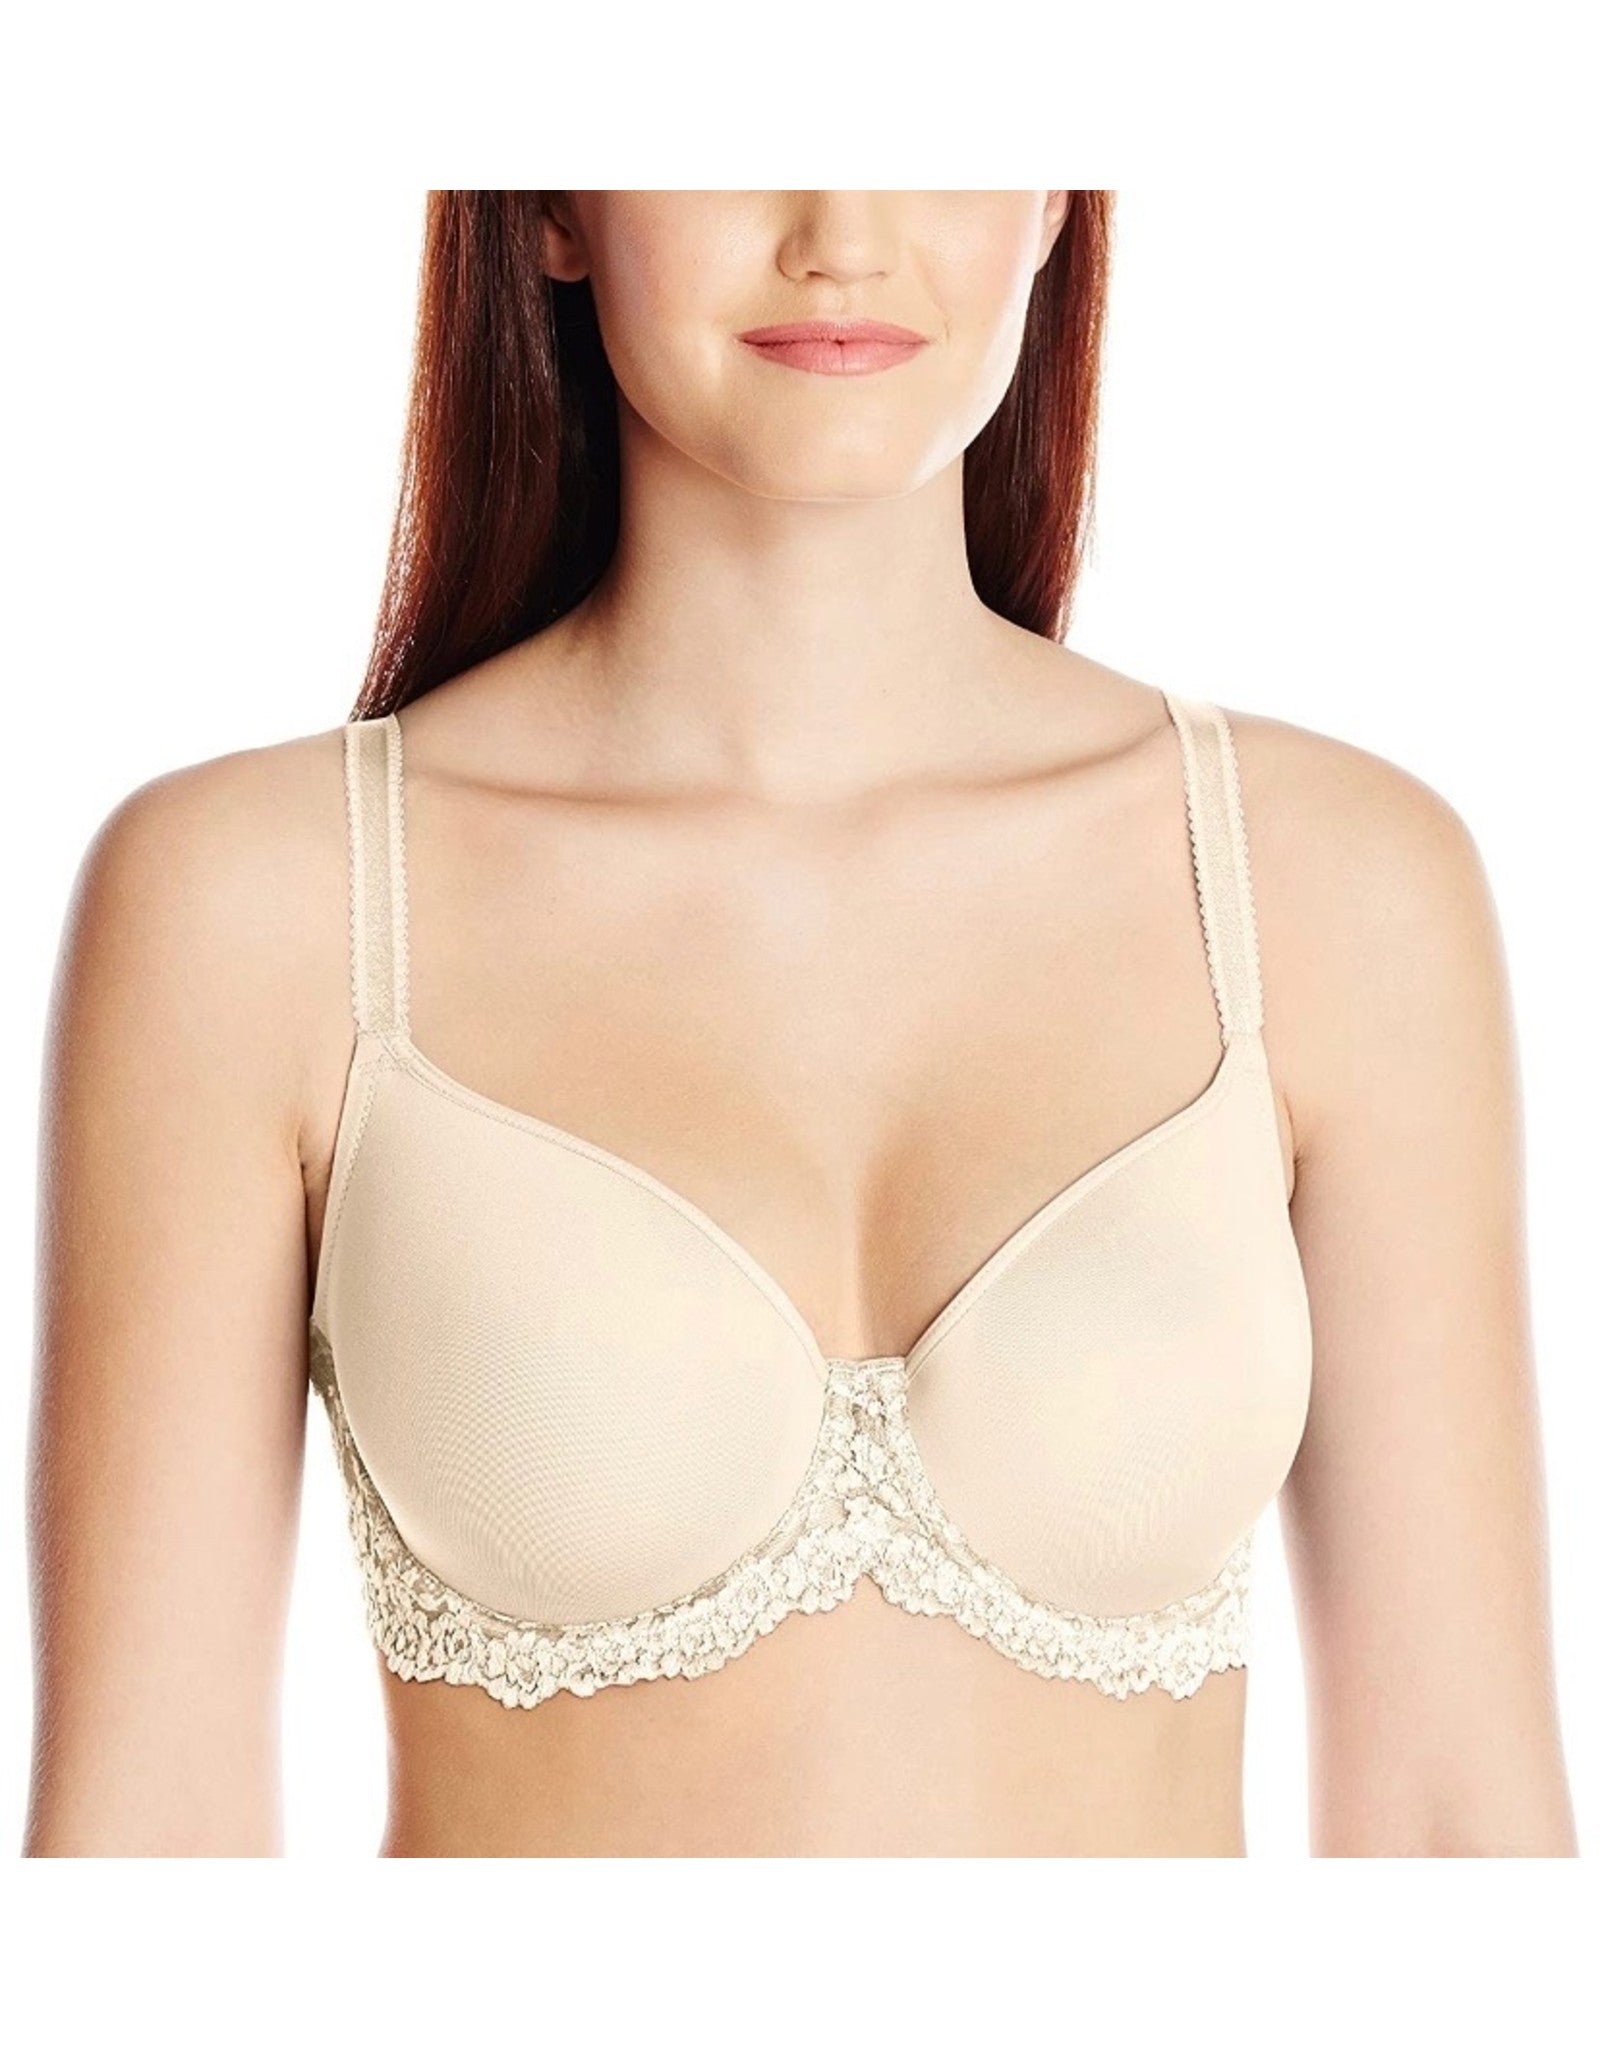 Wacoal Embrace Lace Underwire Contour Bra, Naturally Nude/Ivory